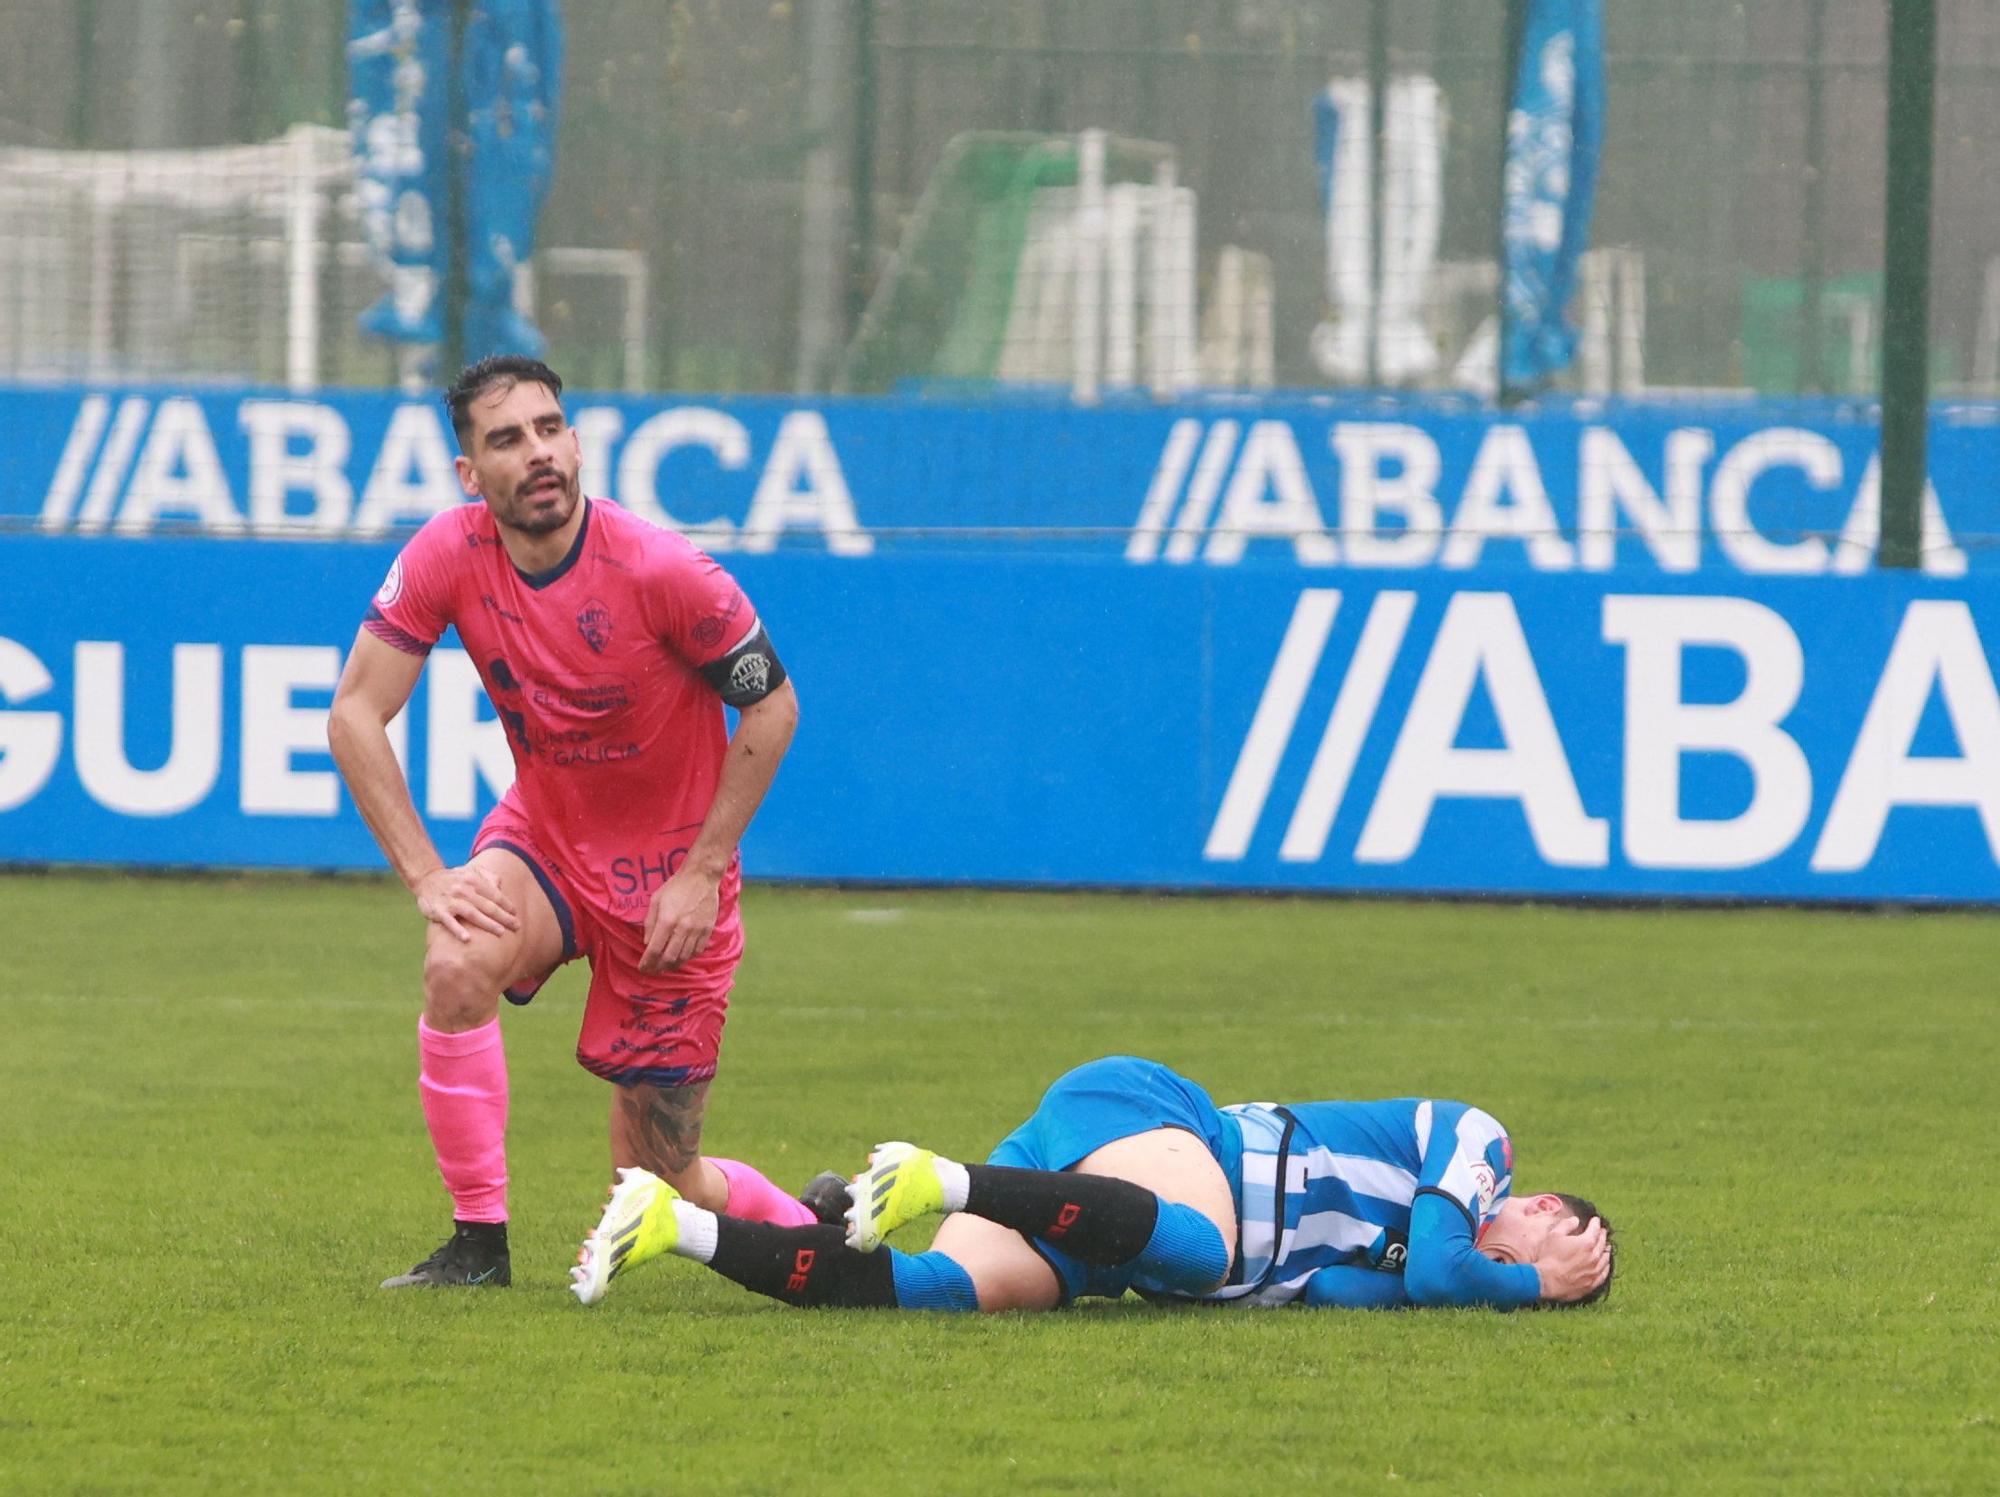 Fabril 1 - 3 Ourense